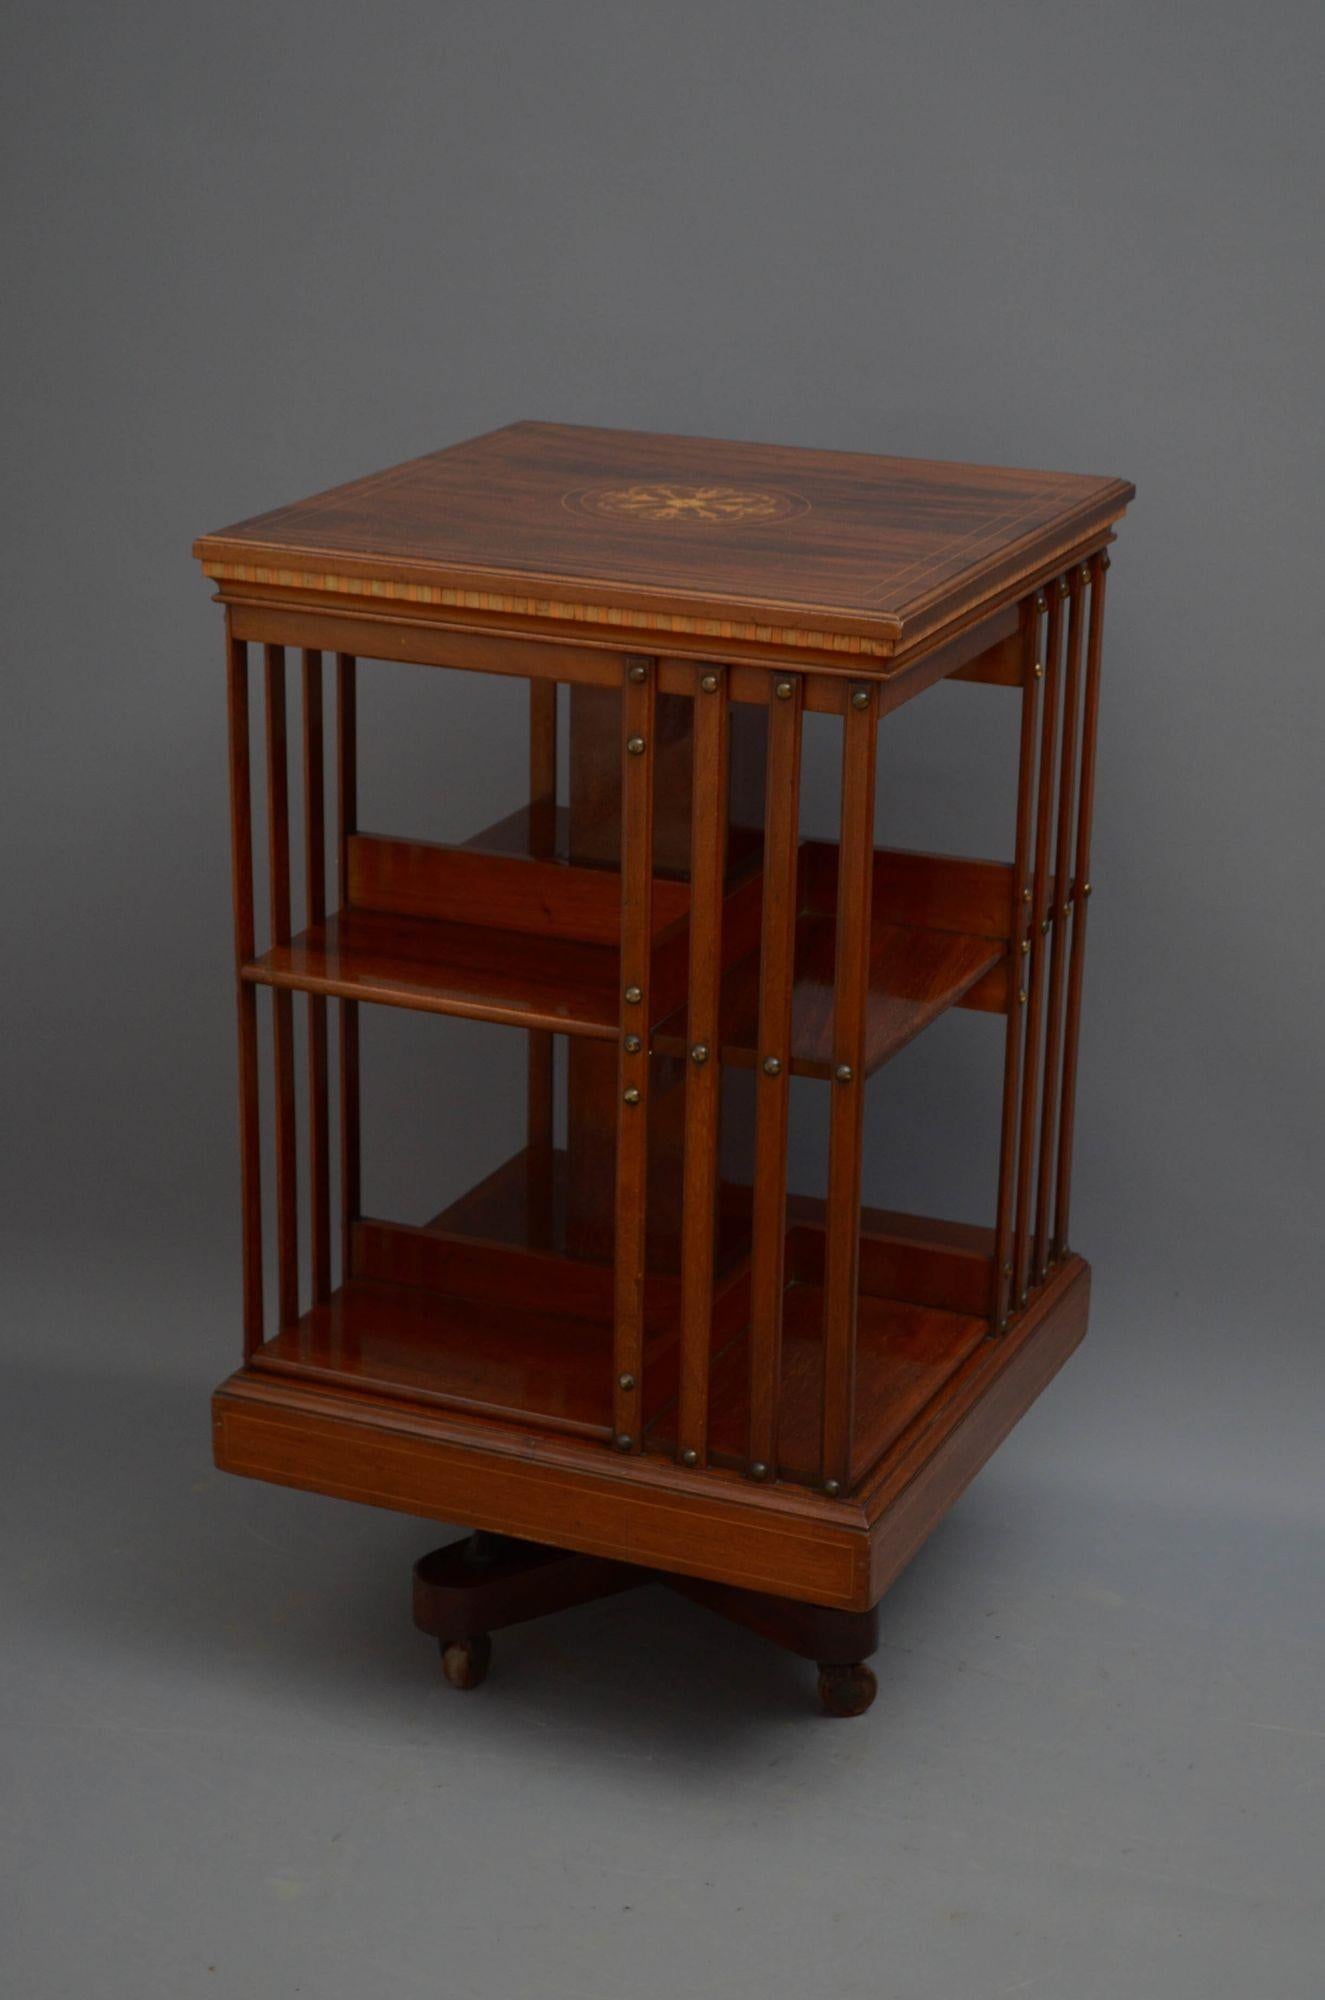 Sn5453 Fine quality Edwardian mahogany and inlaid revolving bookcase, having finely inlaid top with moulded and string inlaid edge above dentil inlaid frieze and four slatted sides, standing on cross stretchers with cast iron support terminating in